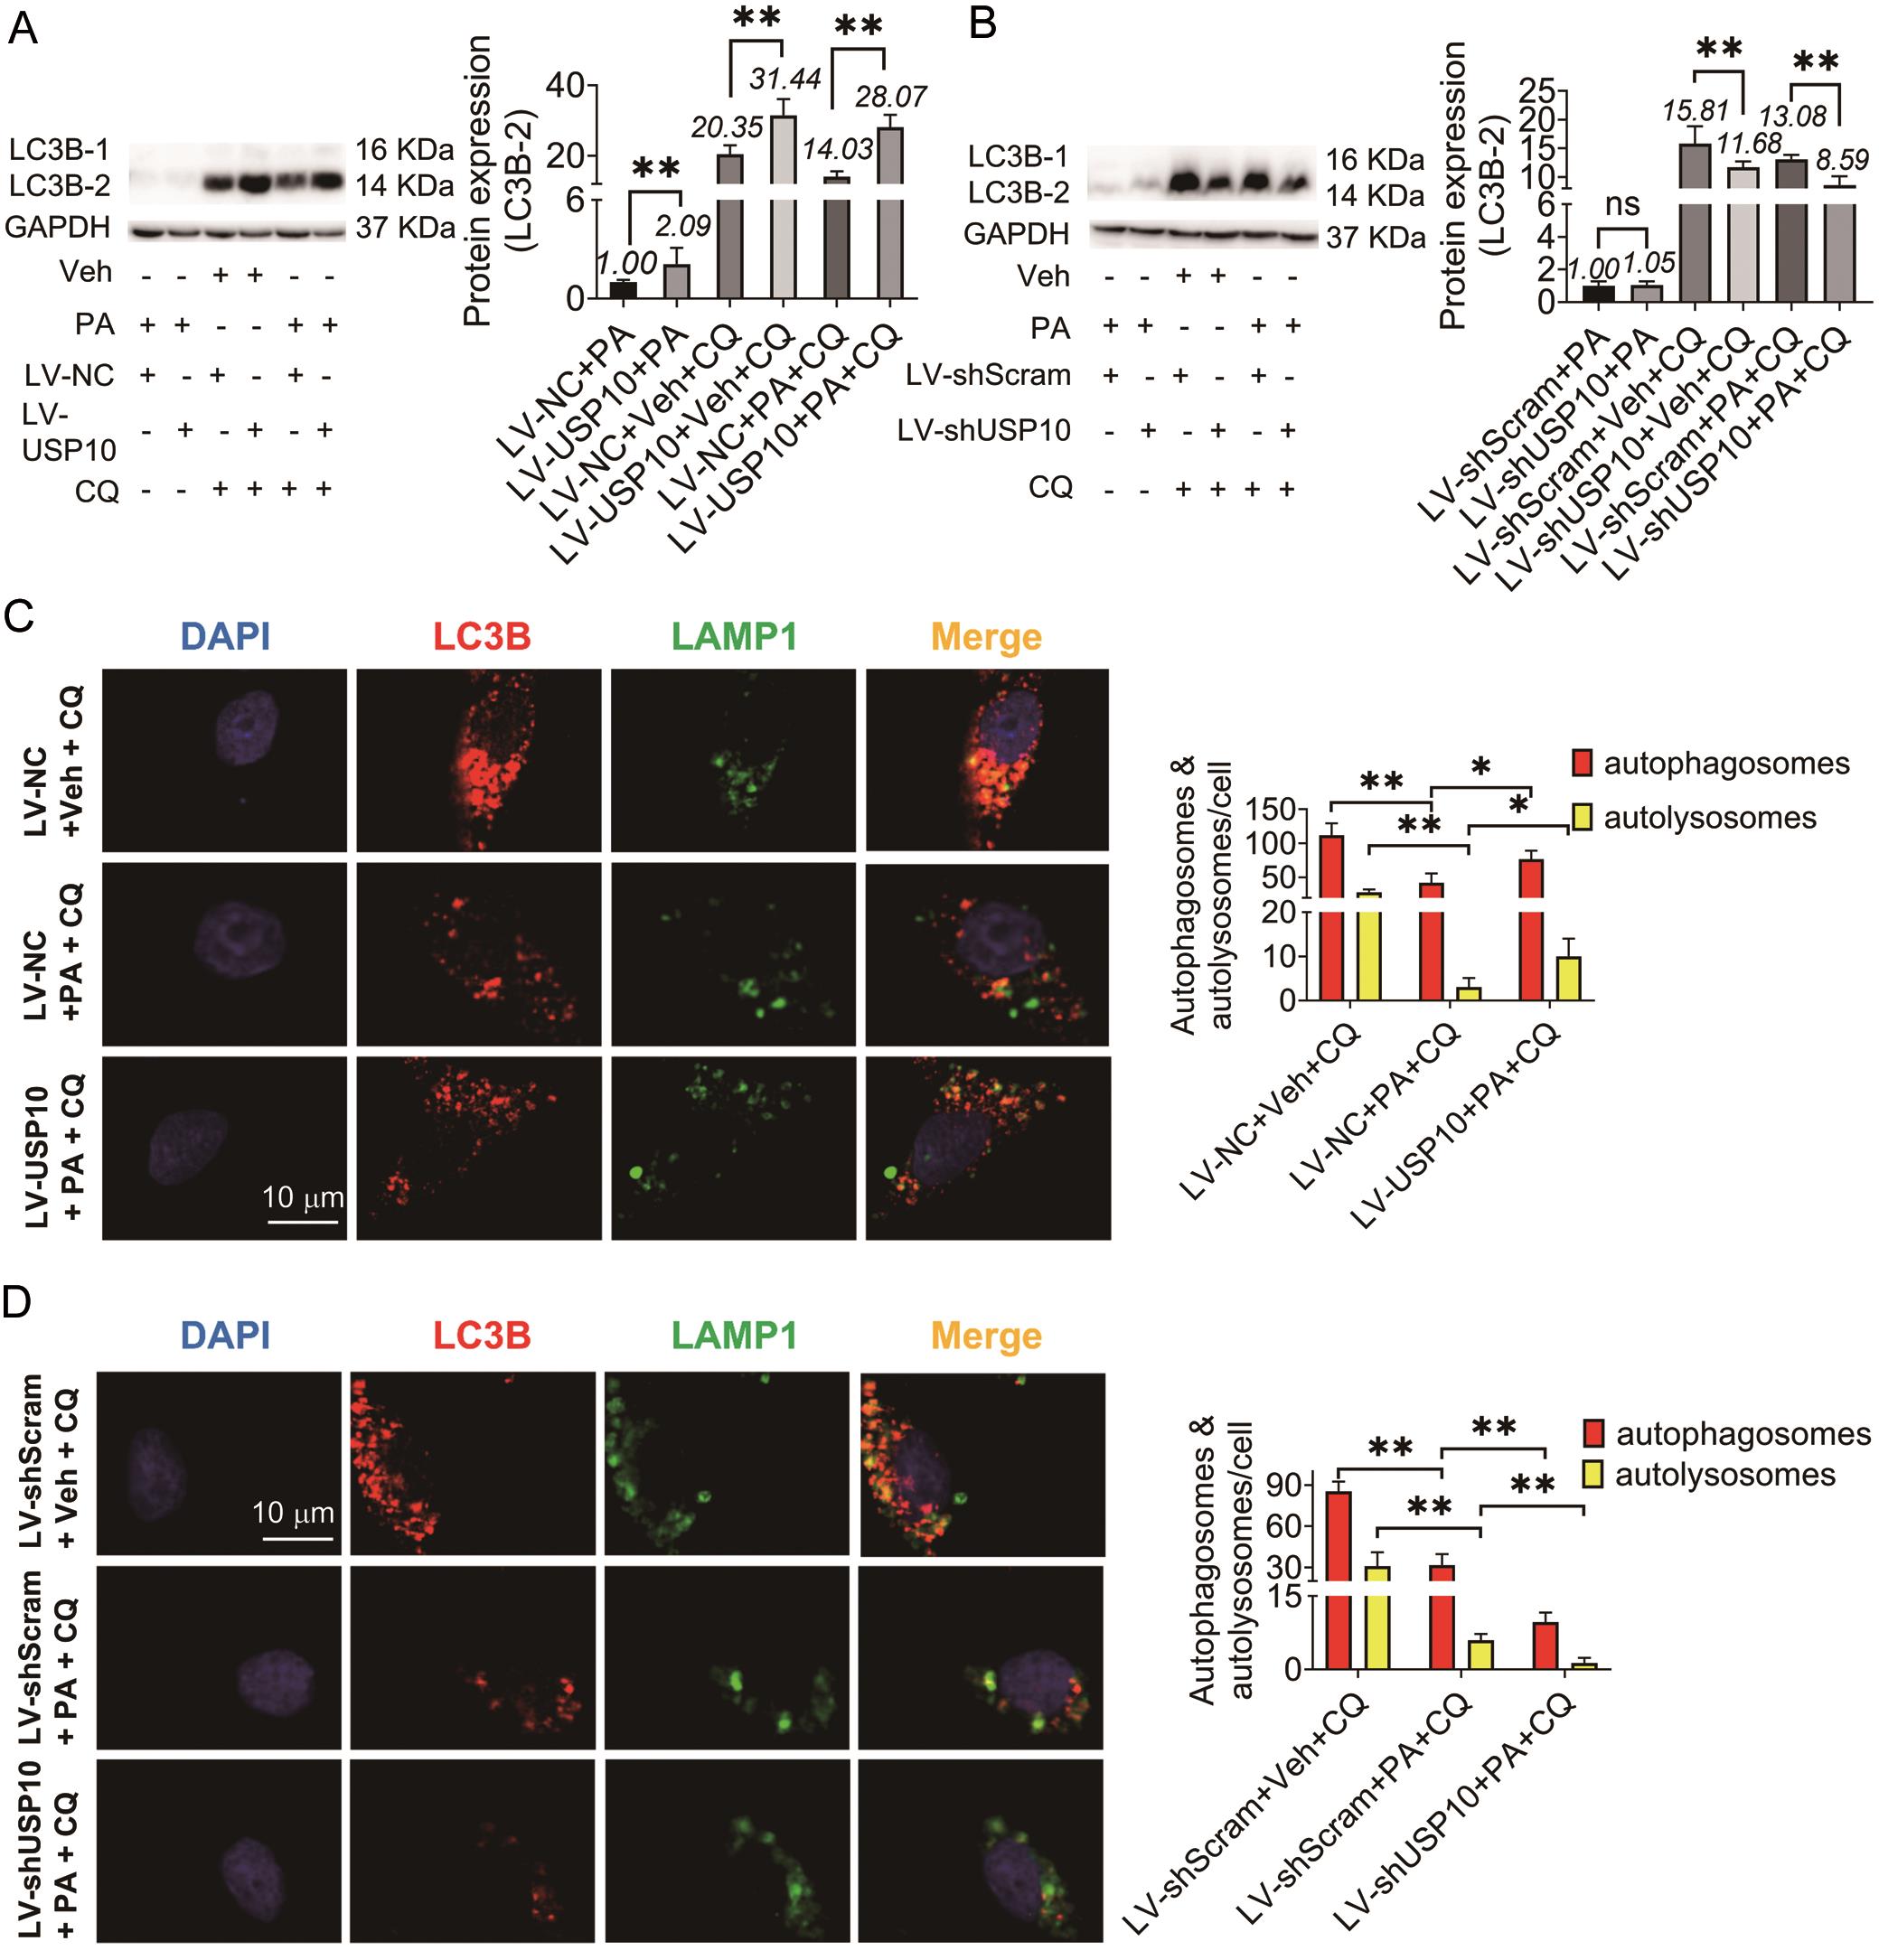 USP10 promoted autophagic flux in HepG2 cells.